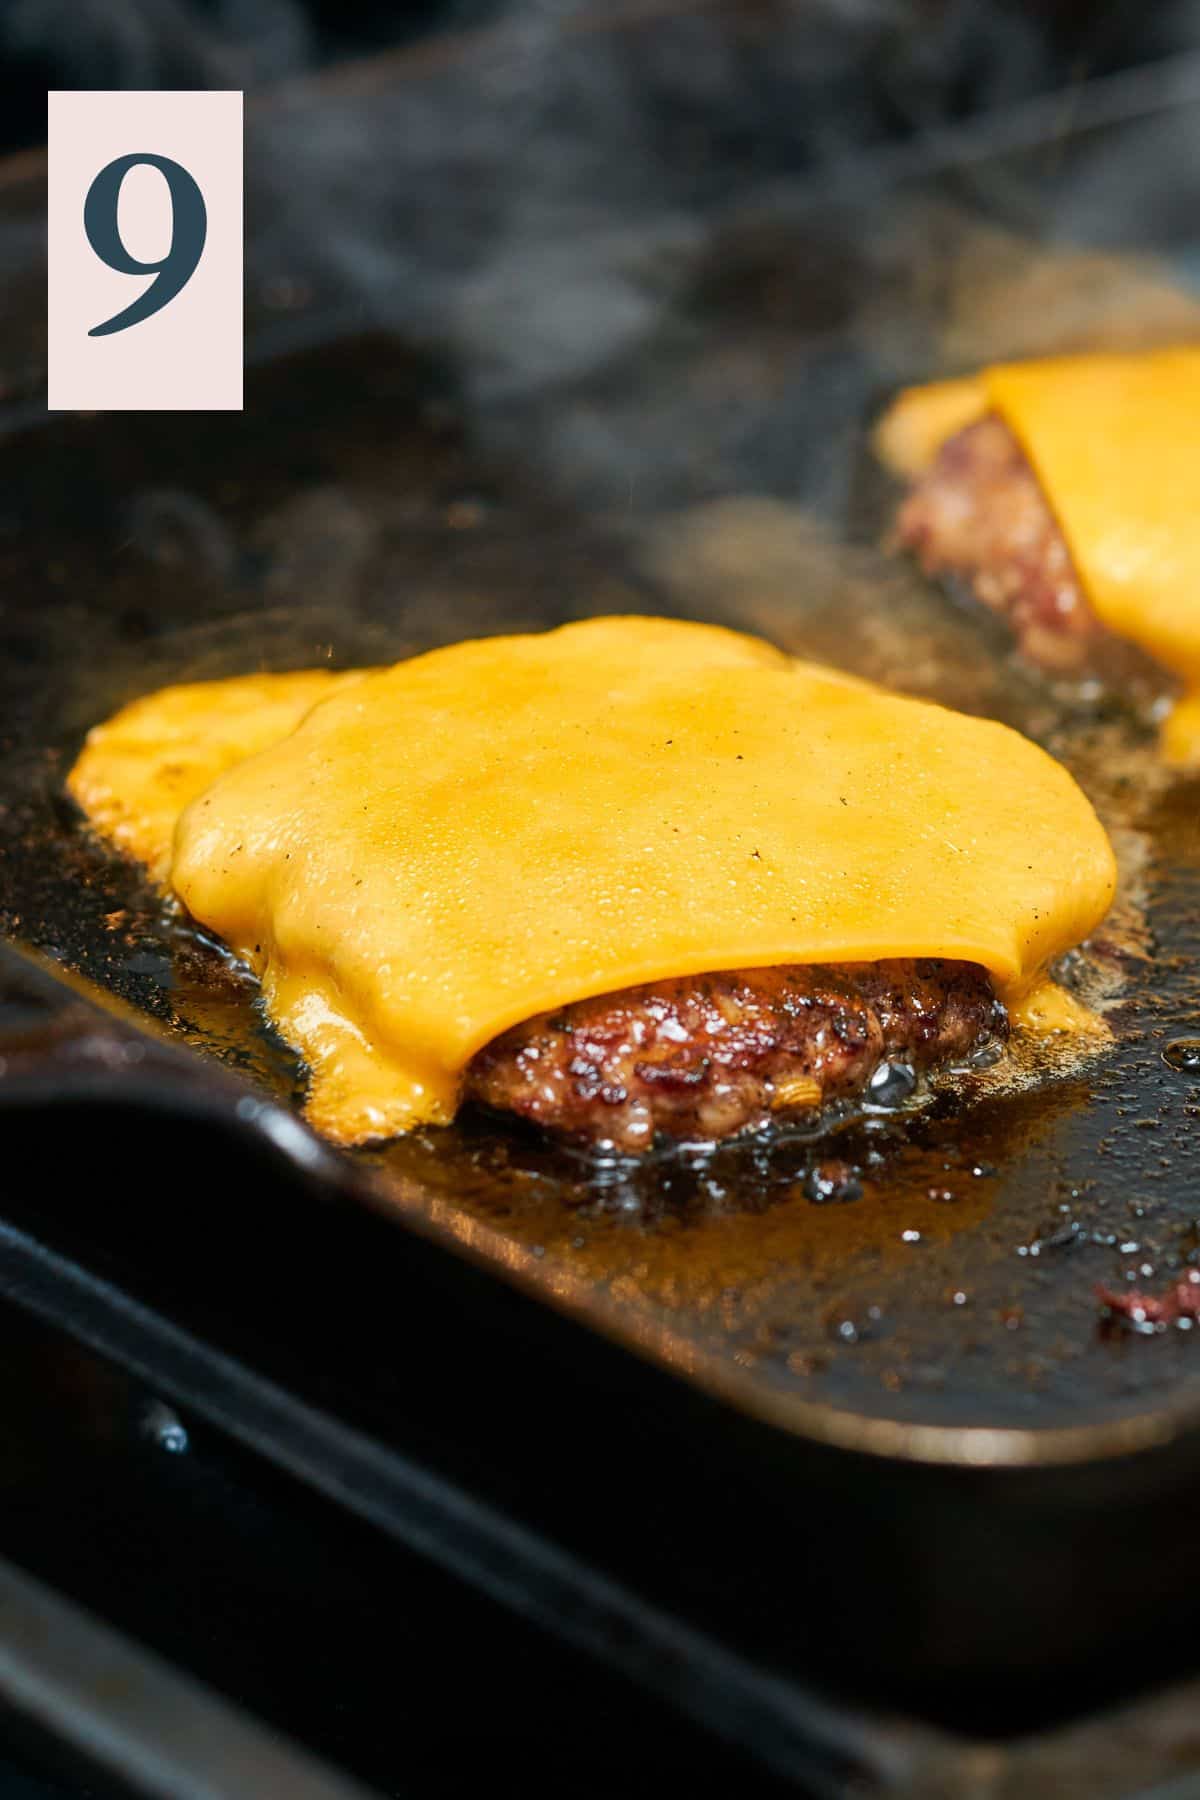 cooked burger patty with cheese melting on it on a hot griddle.